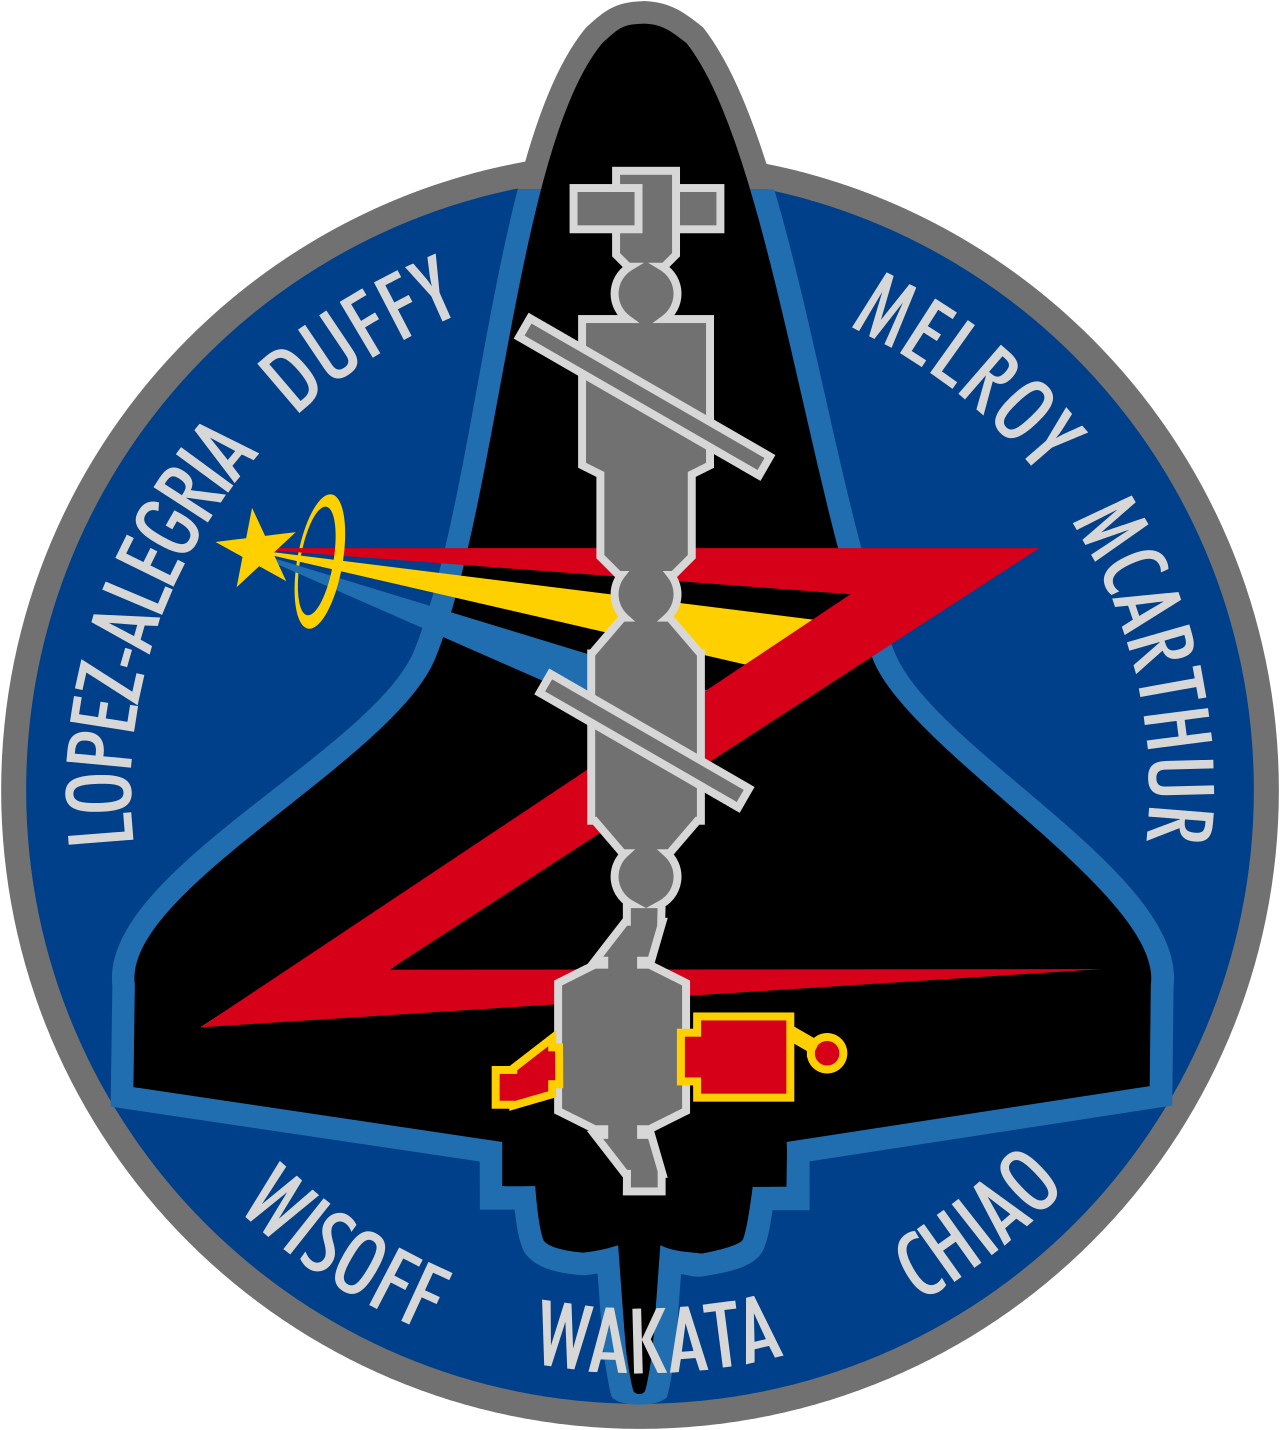 Mission patch for STS-92